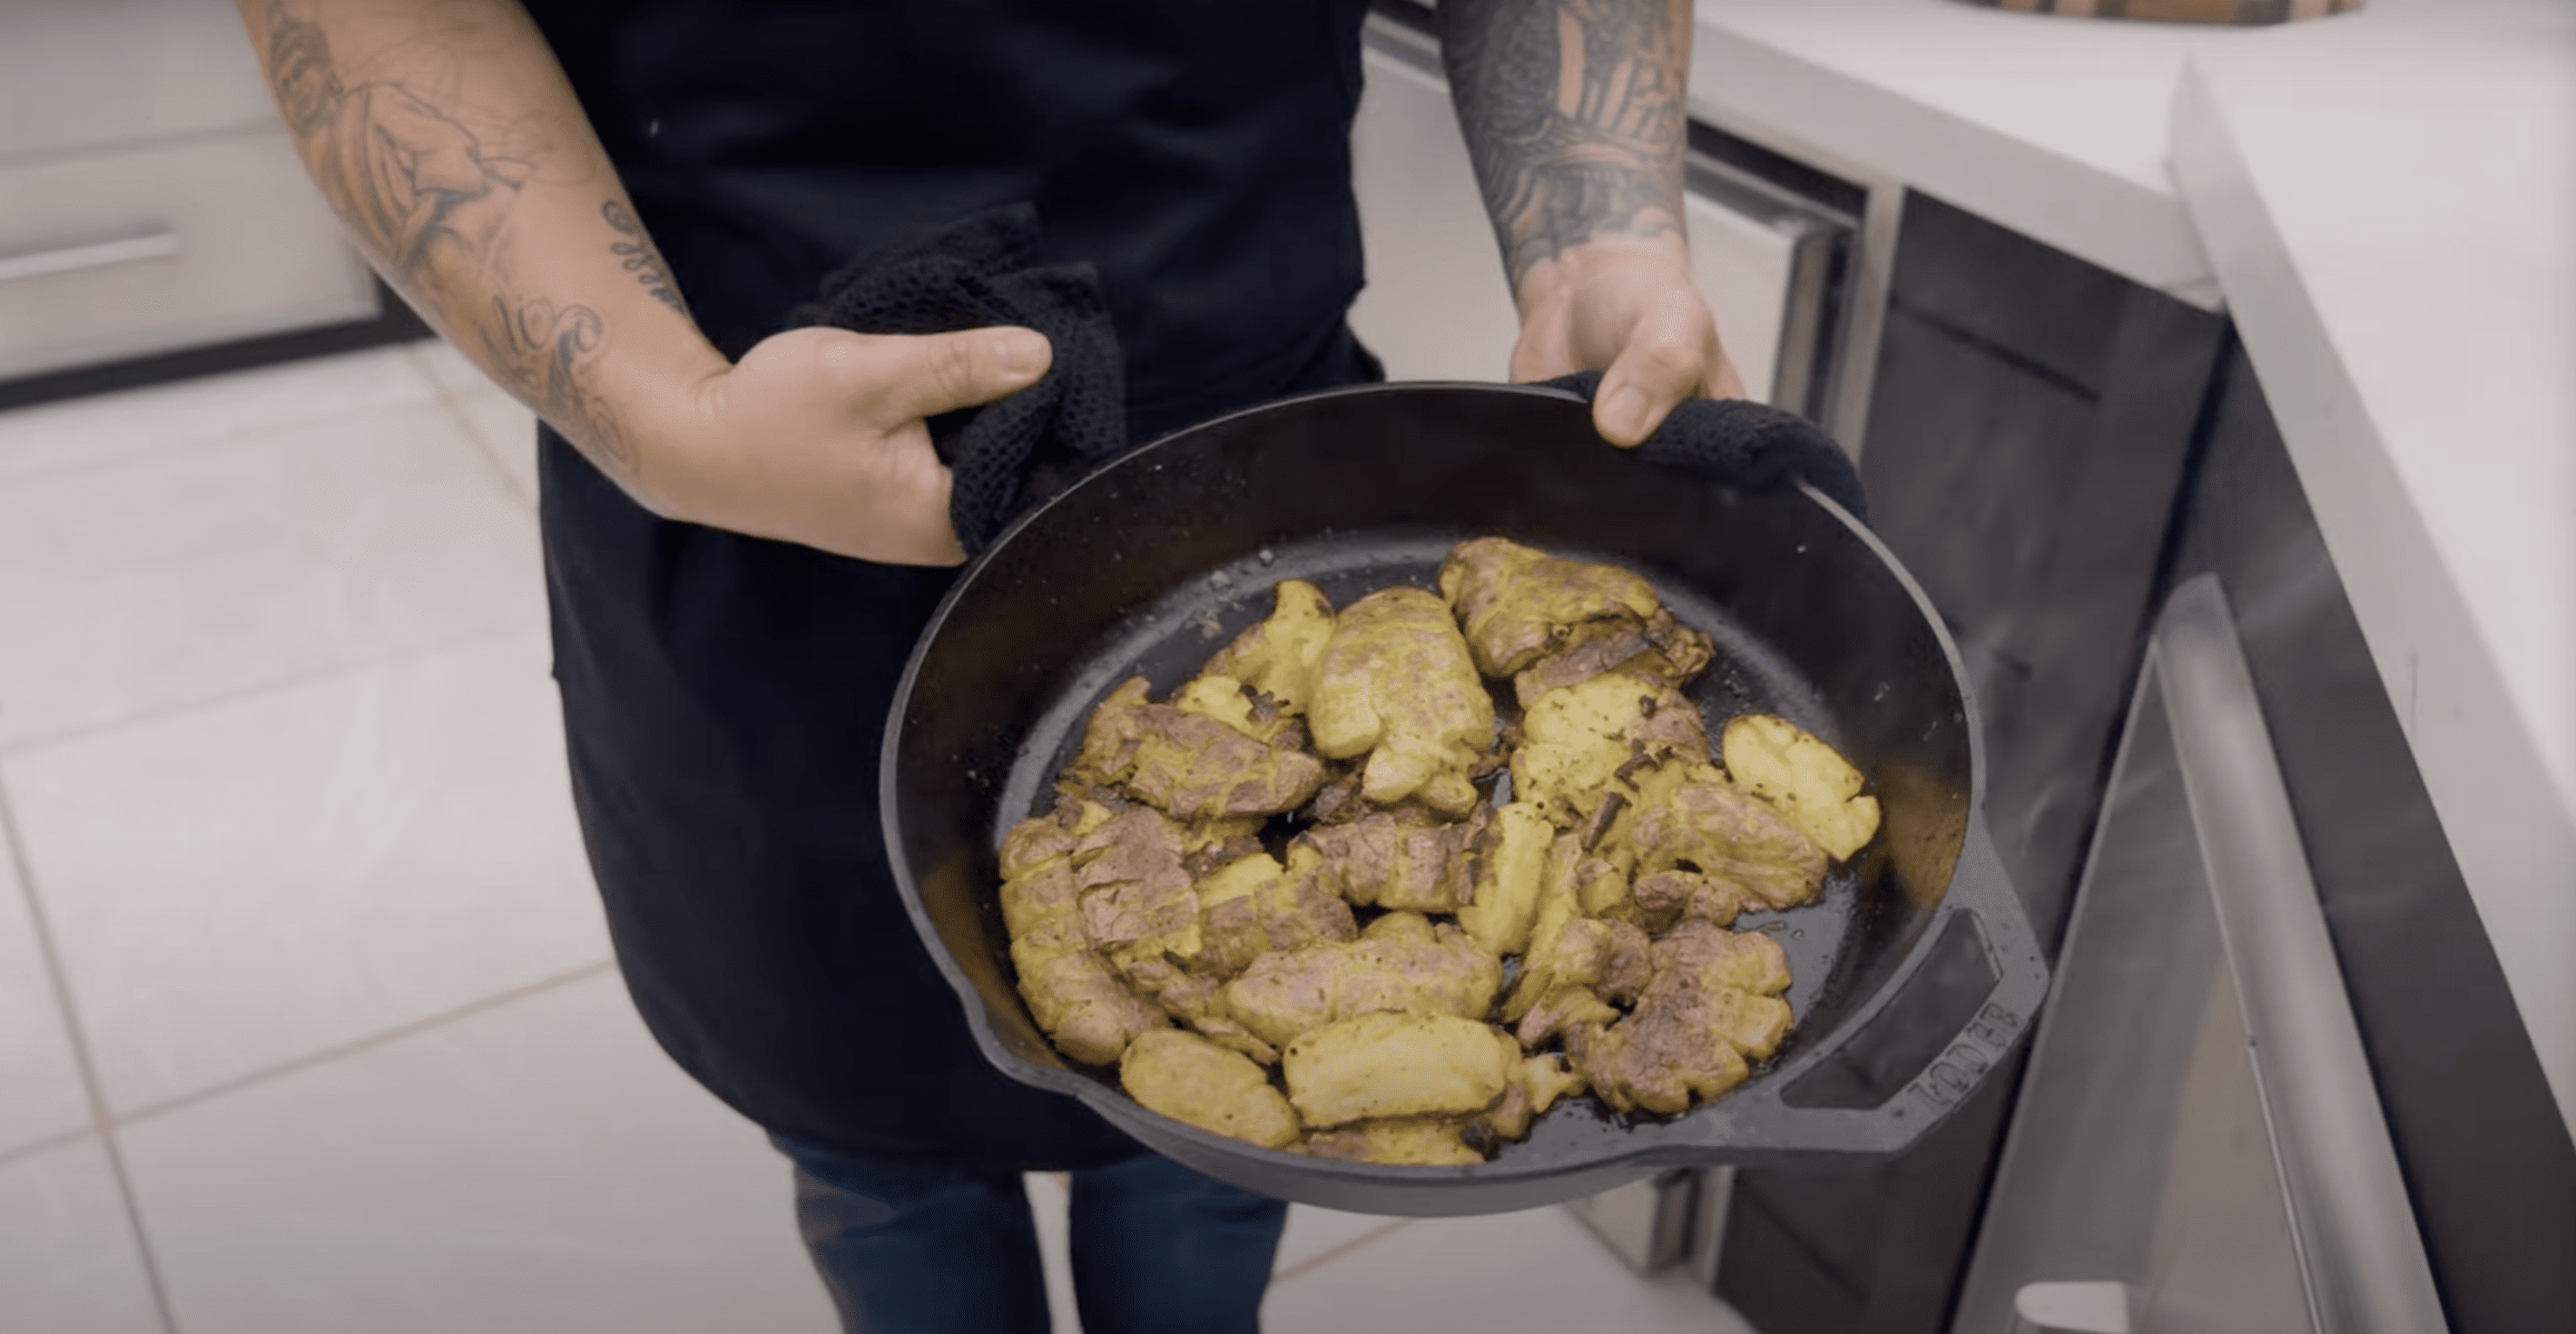 Jet Tila's arms holding a cast iron skillet with smashed potatoes in it